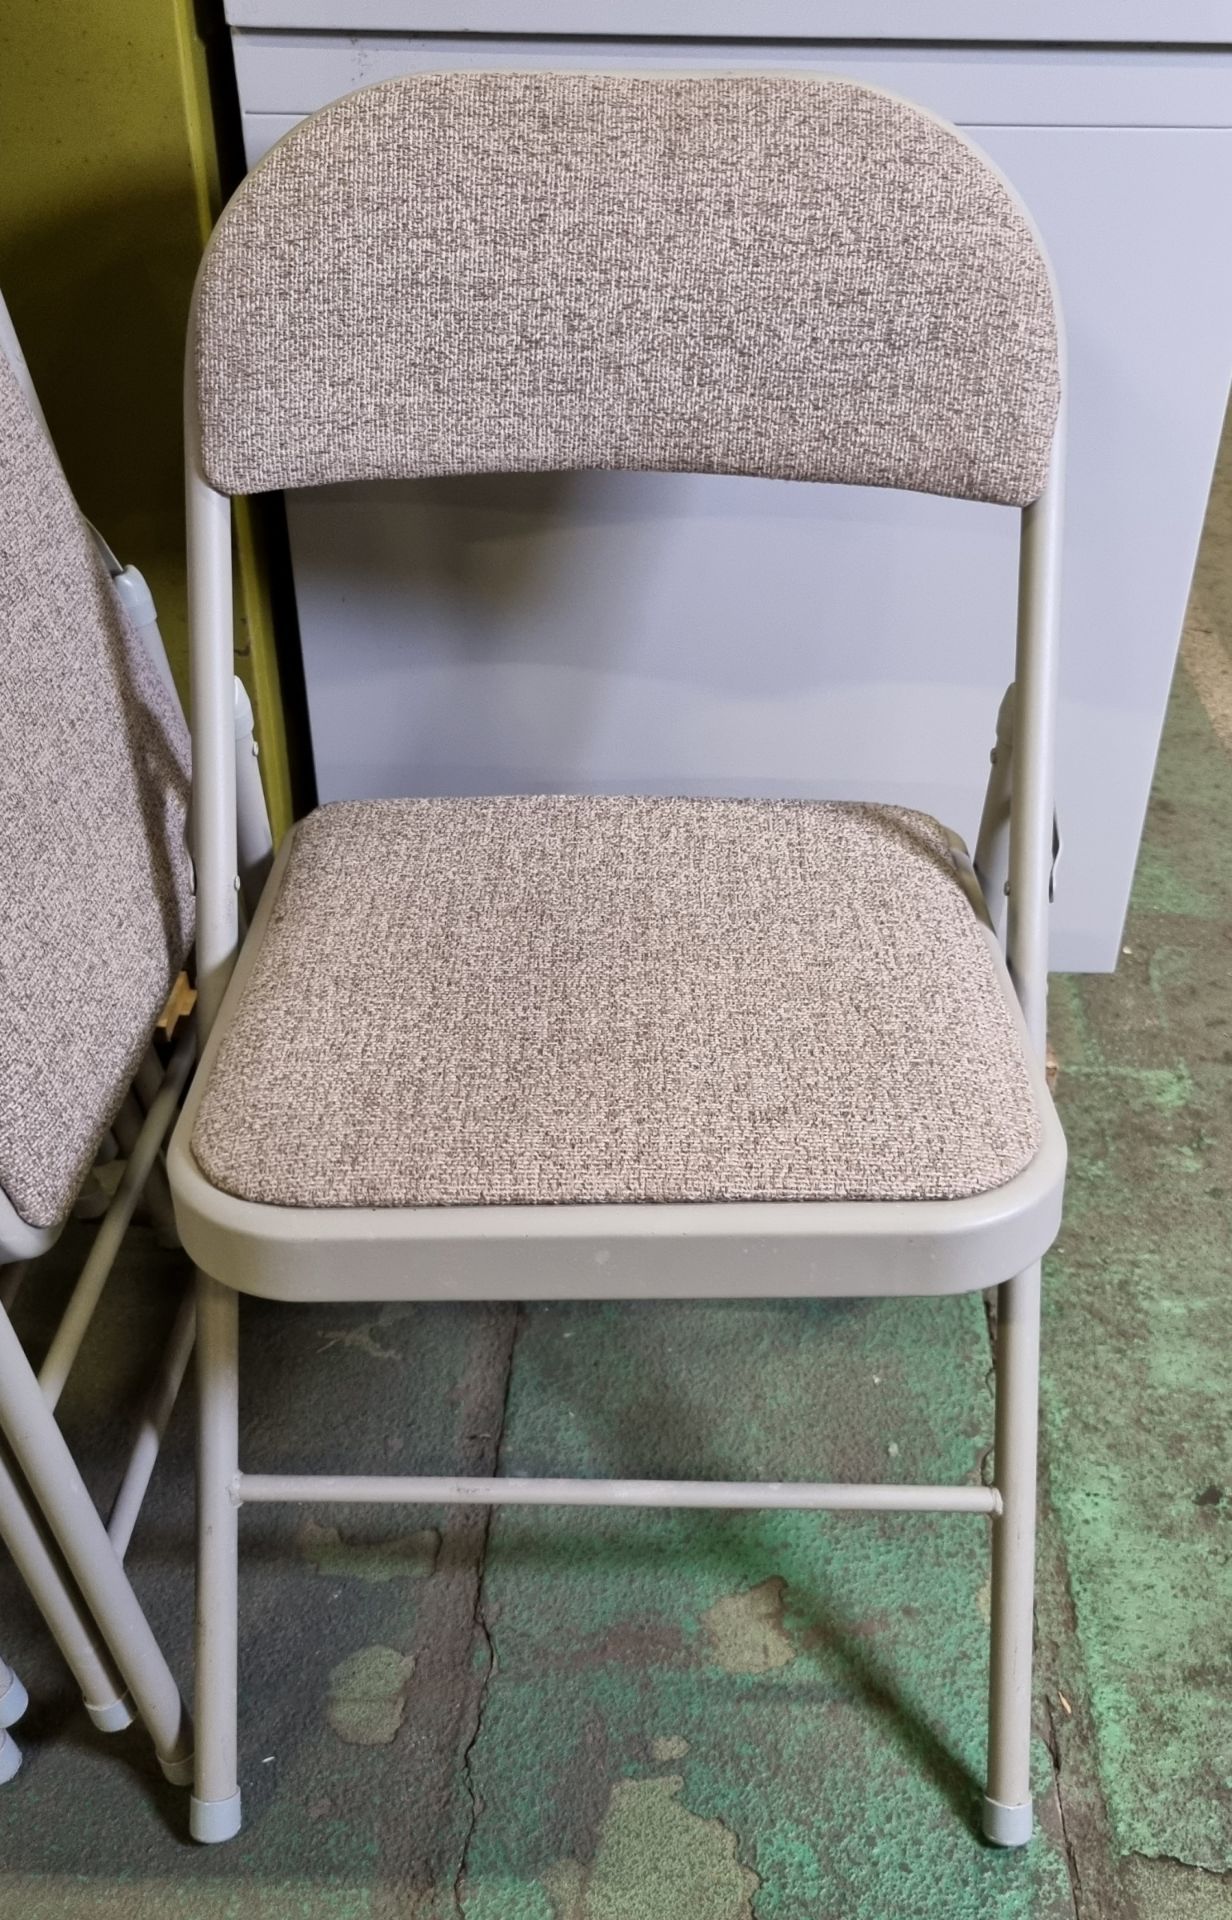 5x Charles Jacobs cushioned fabric folding chairs - Image 2 of 4